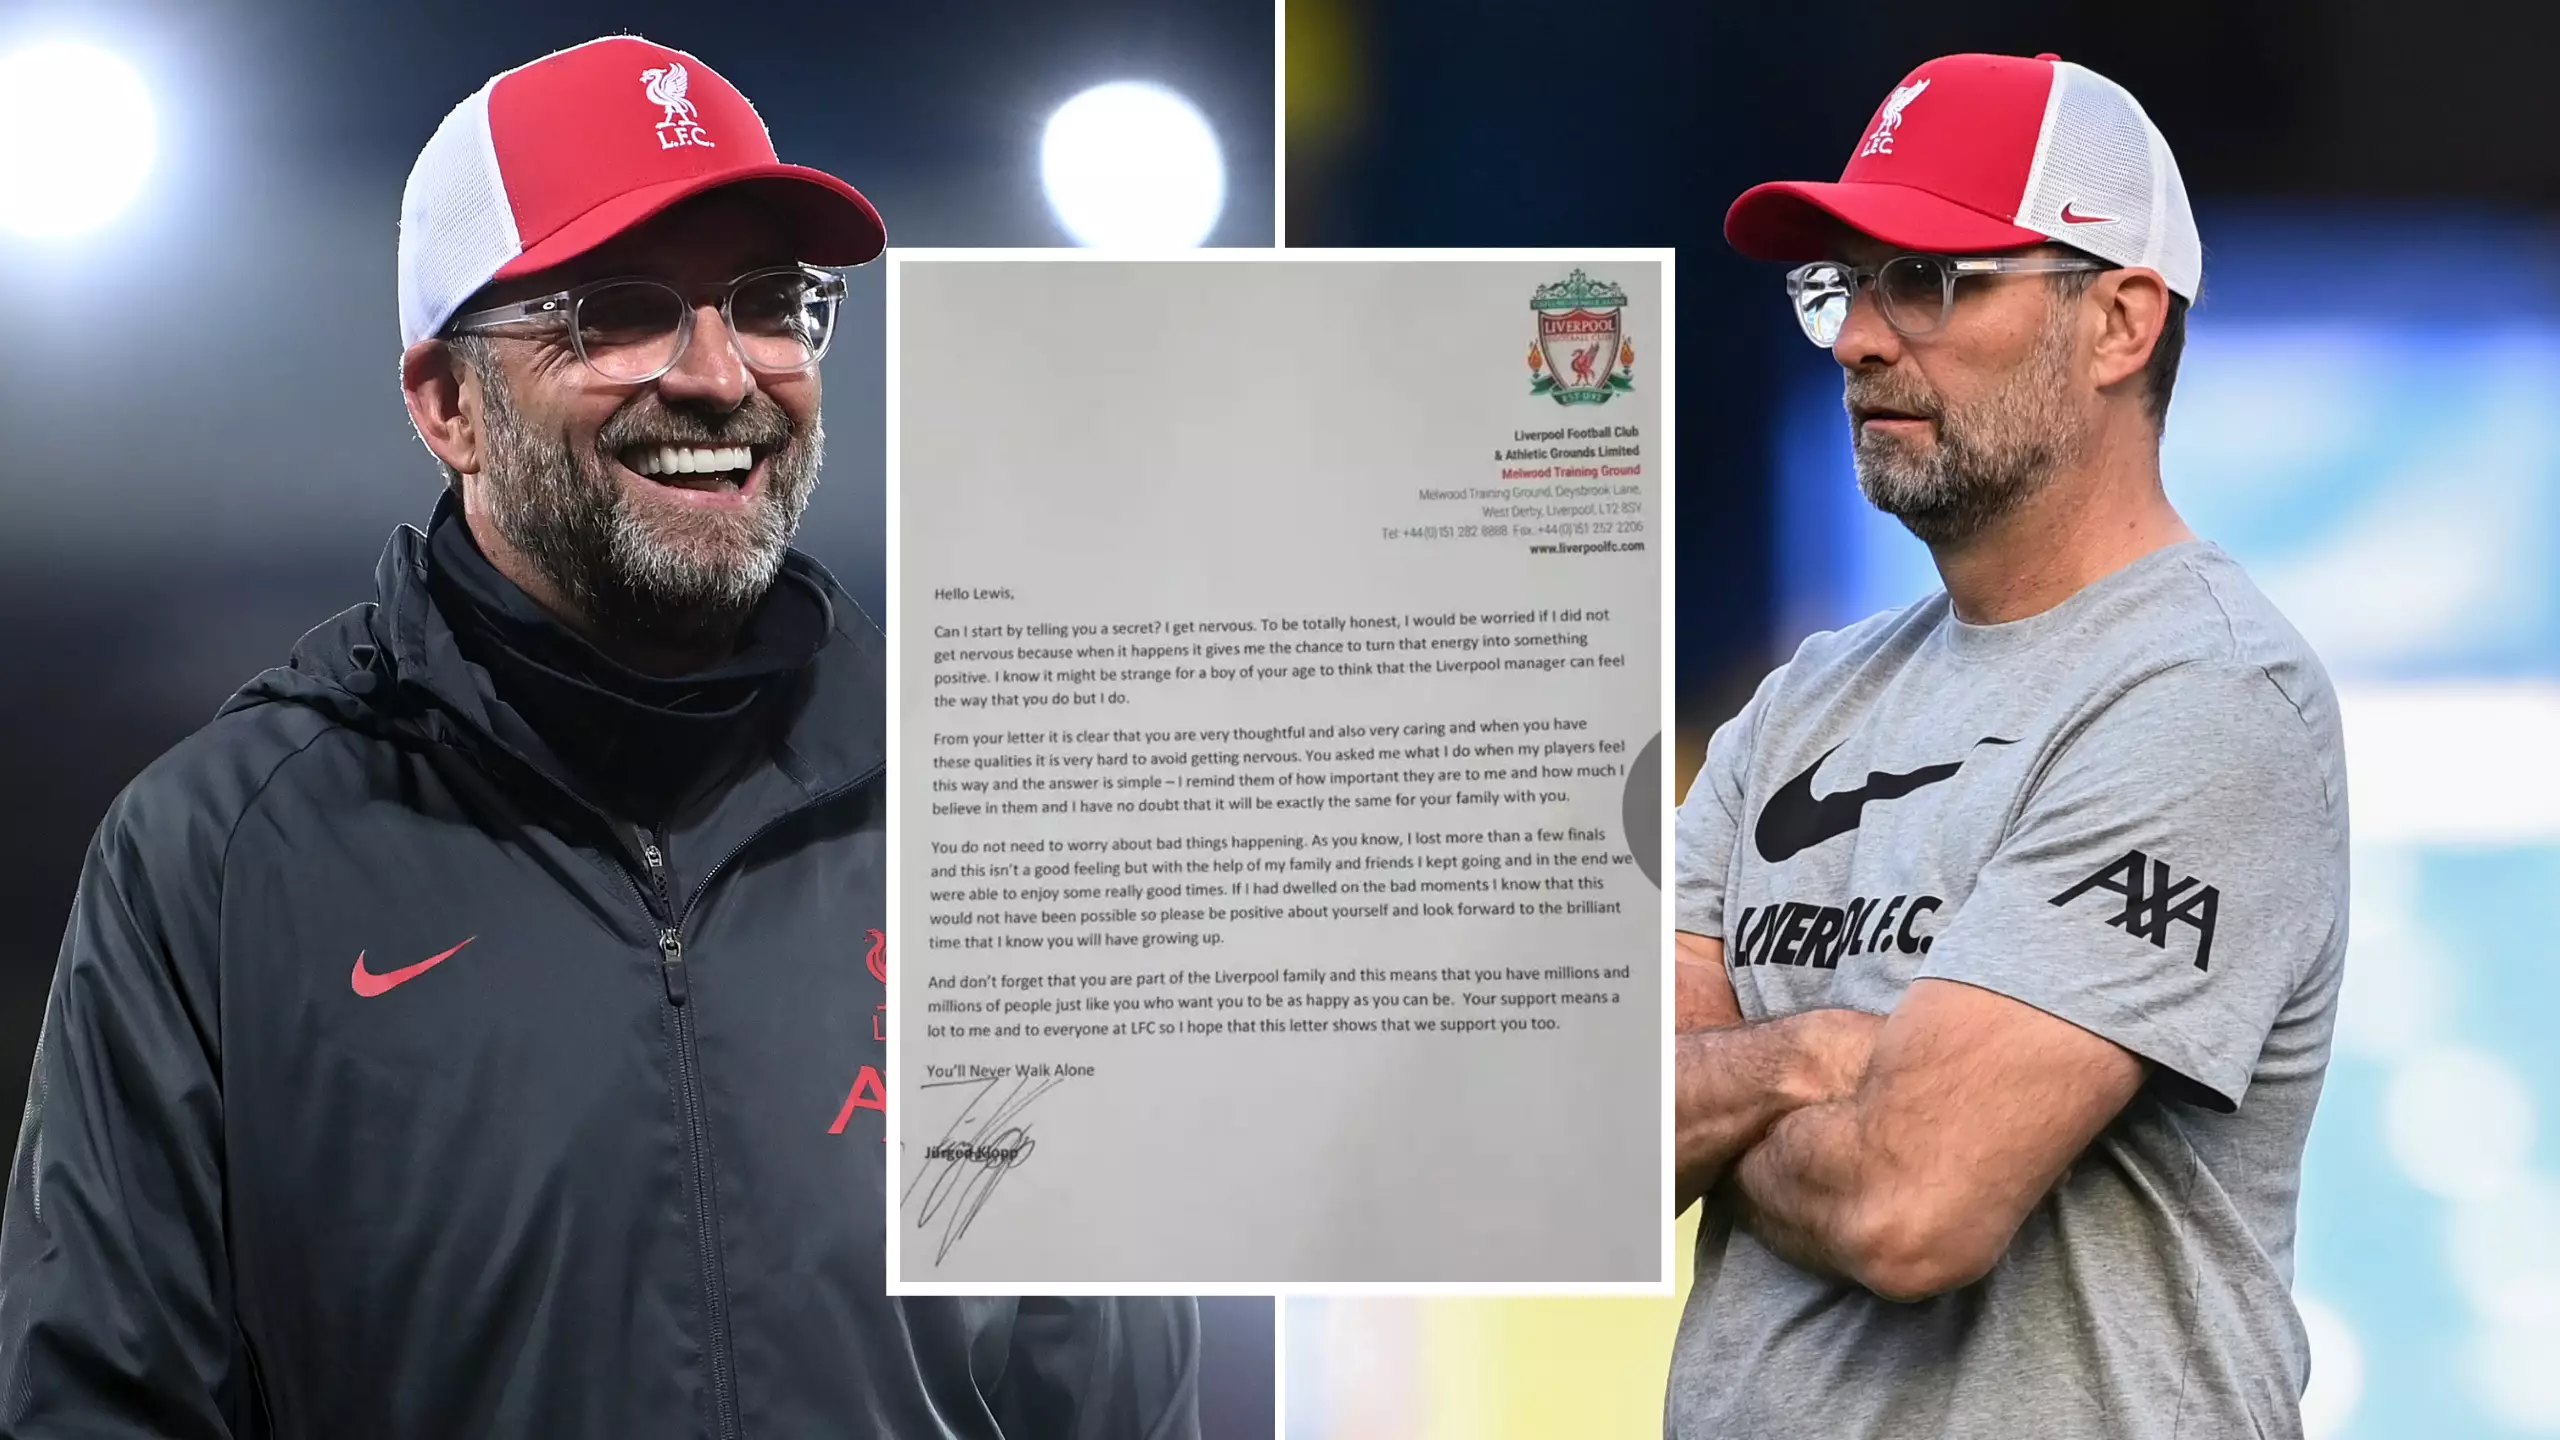 Jurgen Klopp Sends Emotional Letter To 11-Year-Old Liverpool Fan About Anxiety